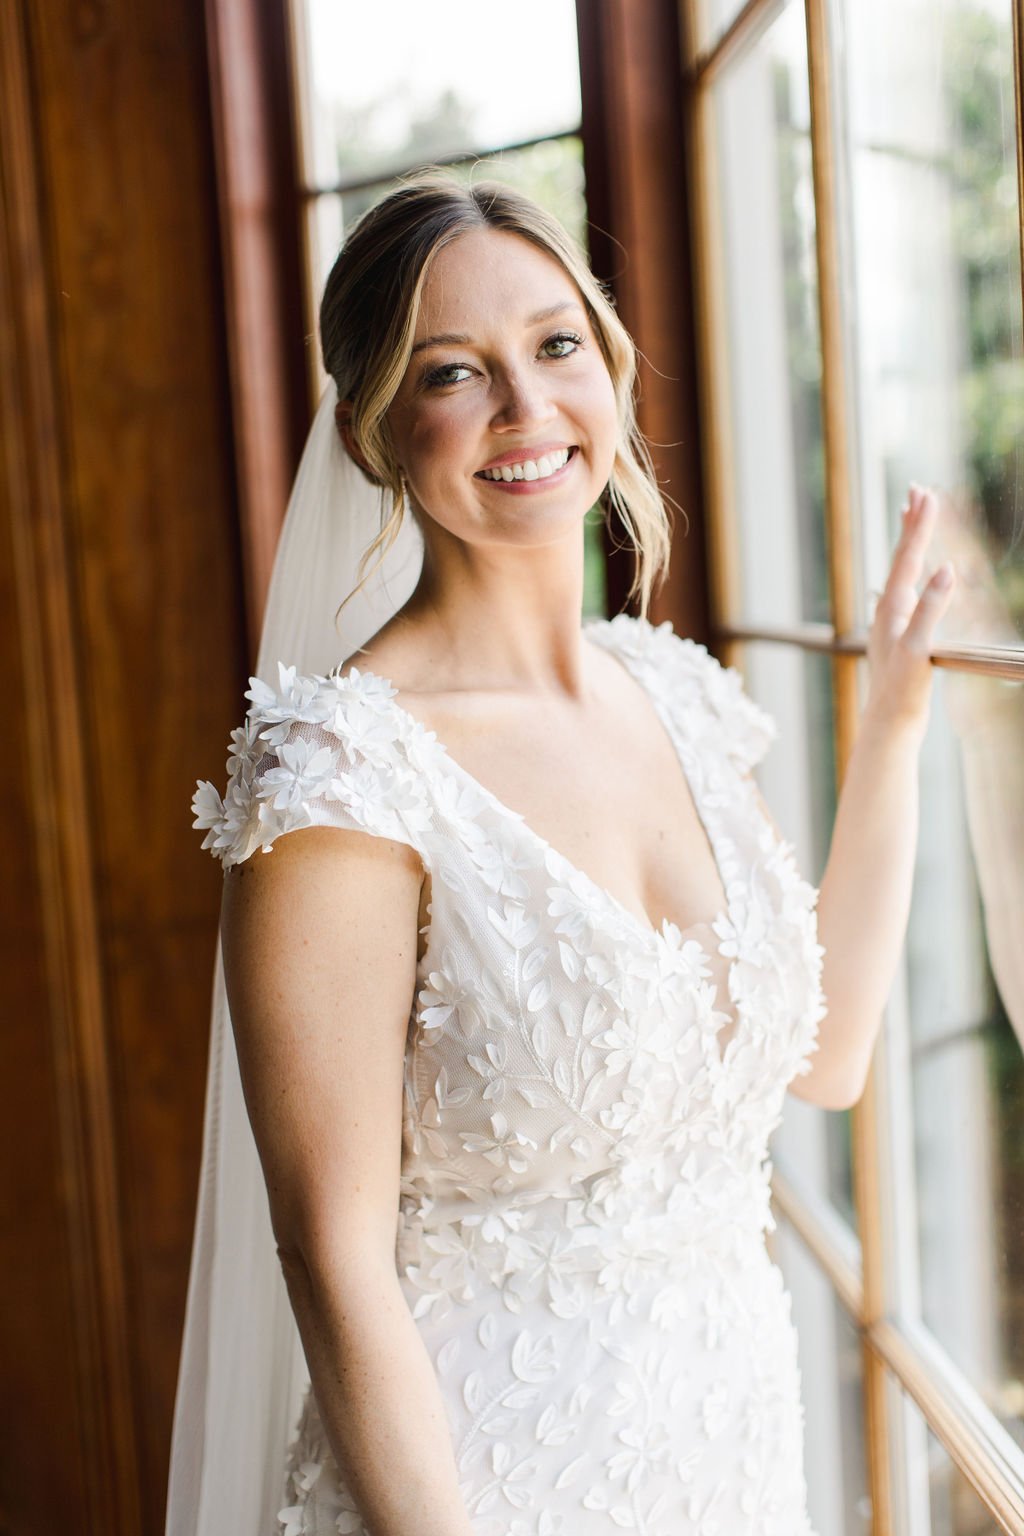 savannah-bride-katelyn-in-darcy-by-made-with-love-a-chic-modern-wedding-dress-witth-cap-sleeves-and-3d-floral-applique-purchased-from-savannah-bridal-shop-ivory-and-beau-2.jpg